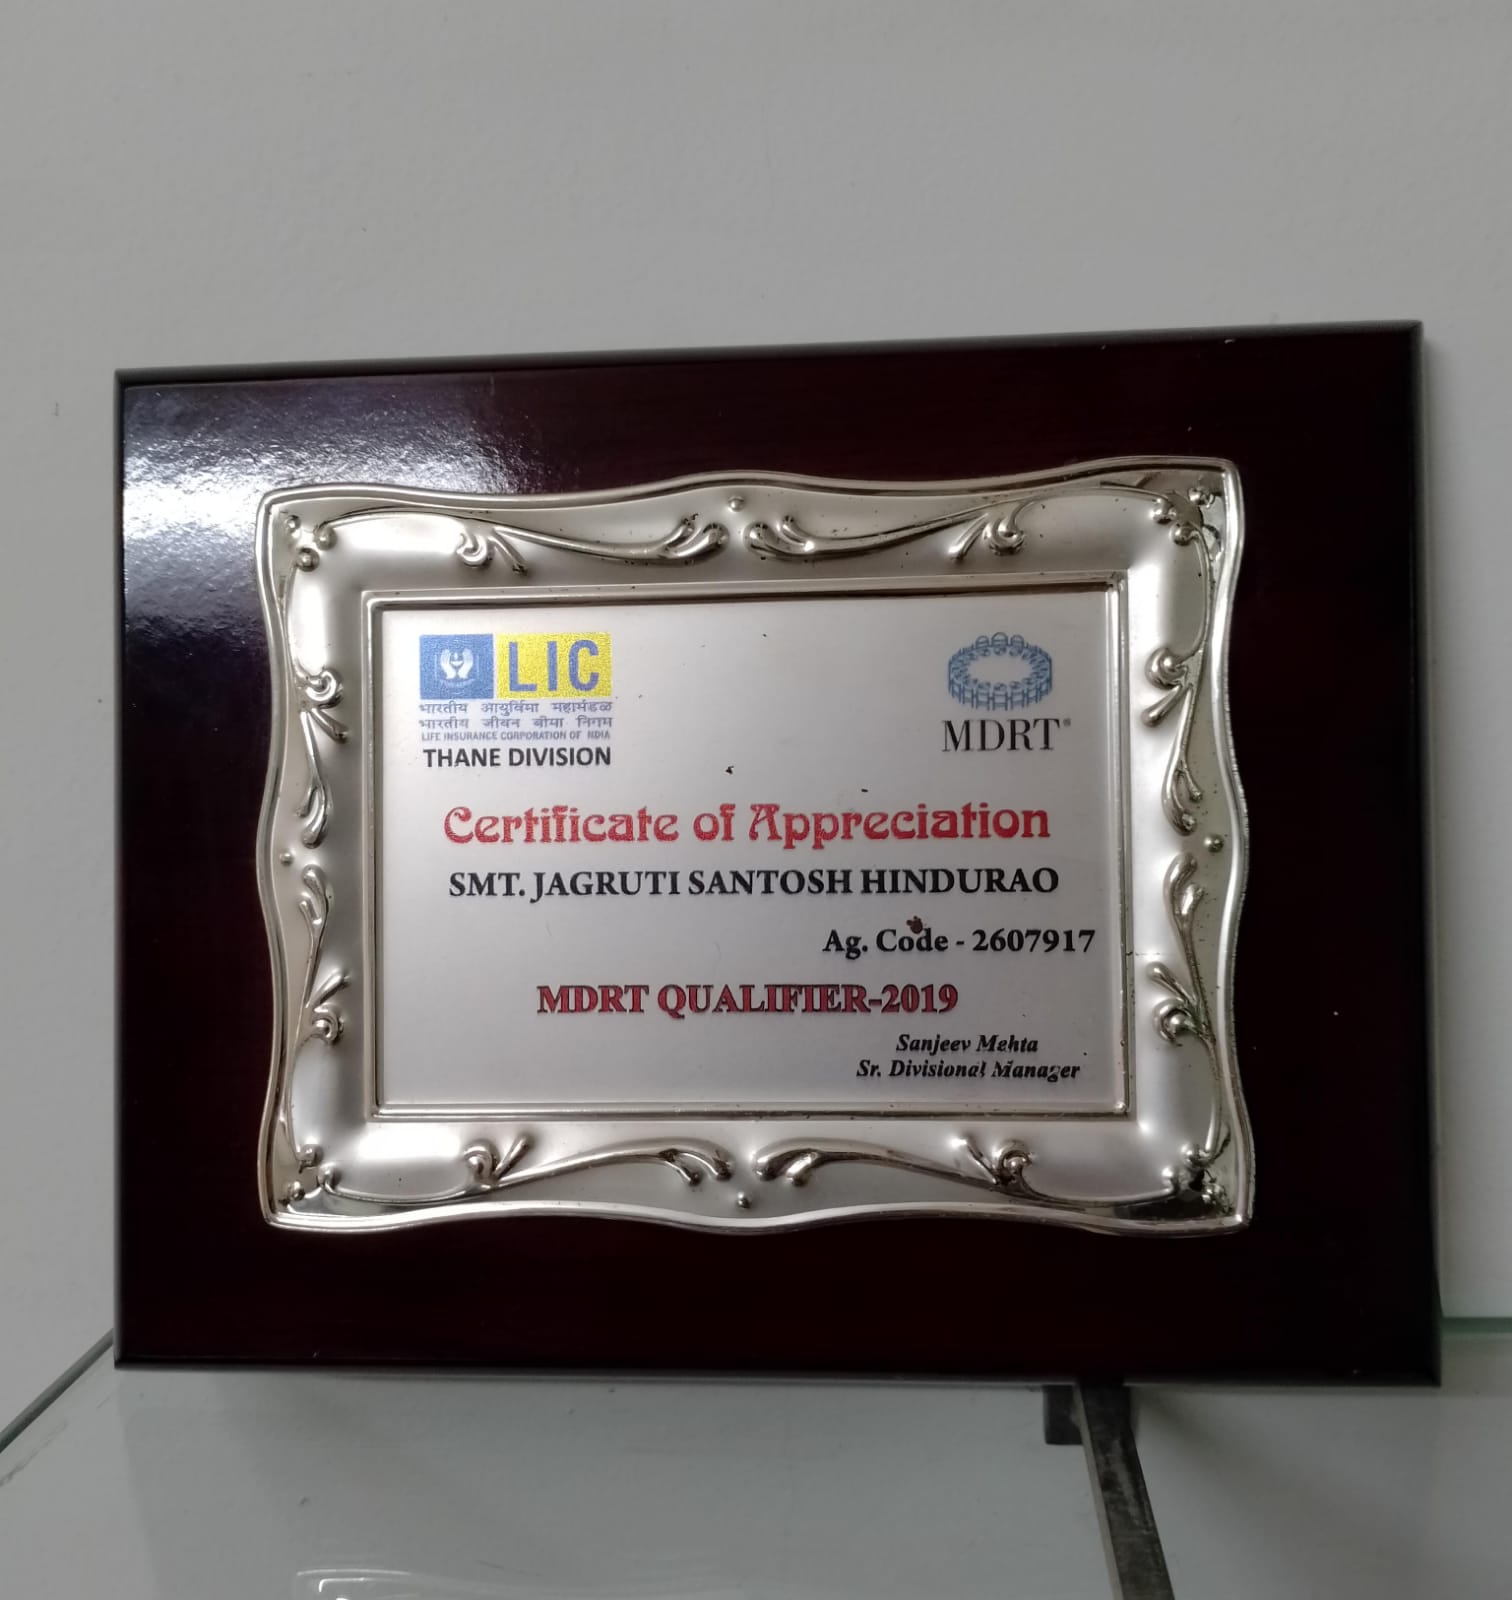 2019 MDRT-USA CERTIFICATE BY THANE DIVISION